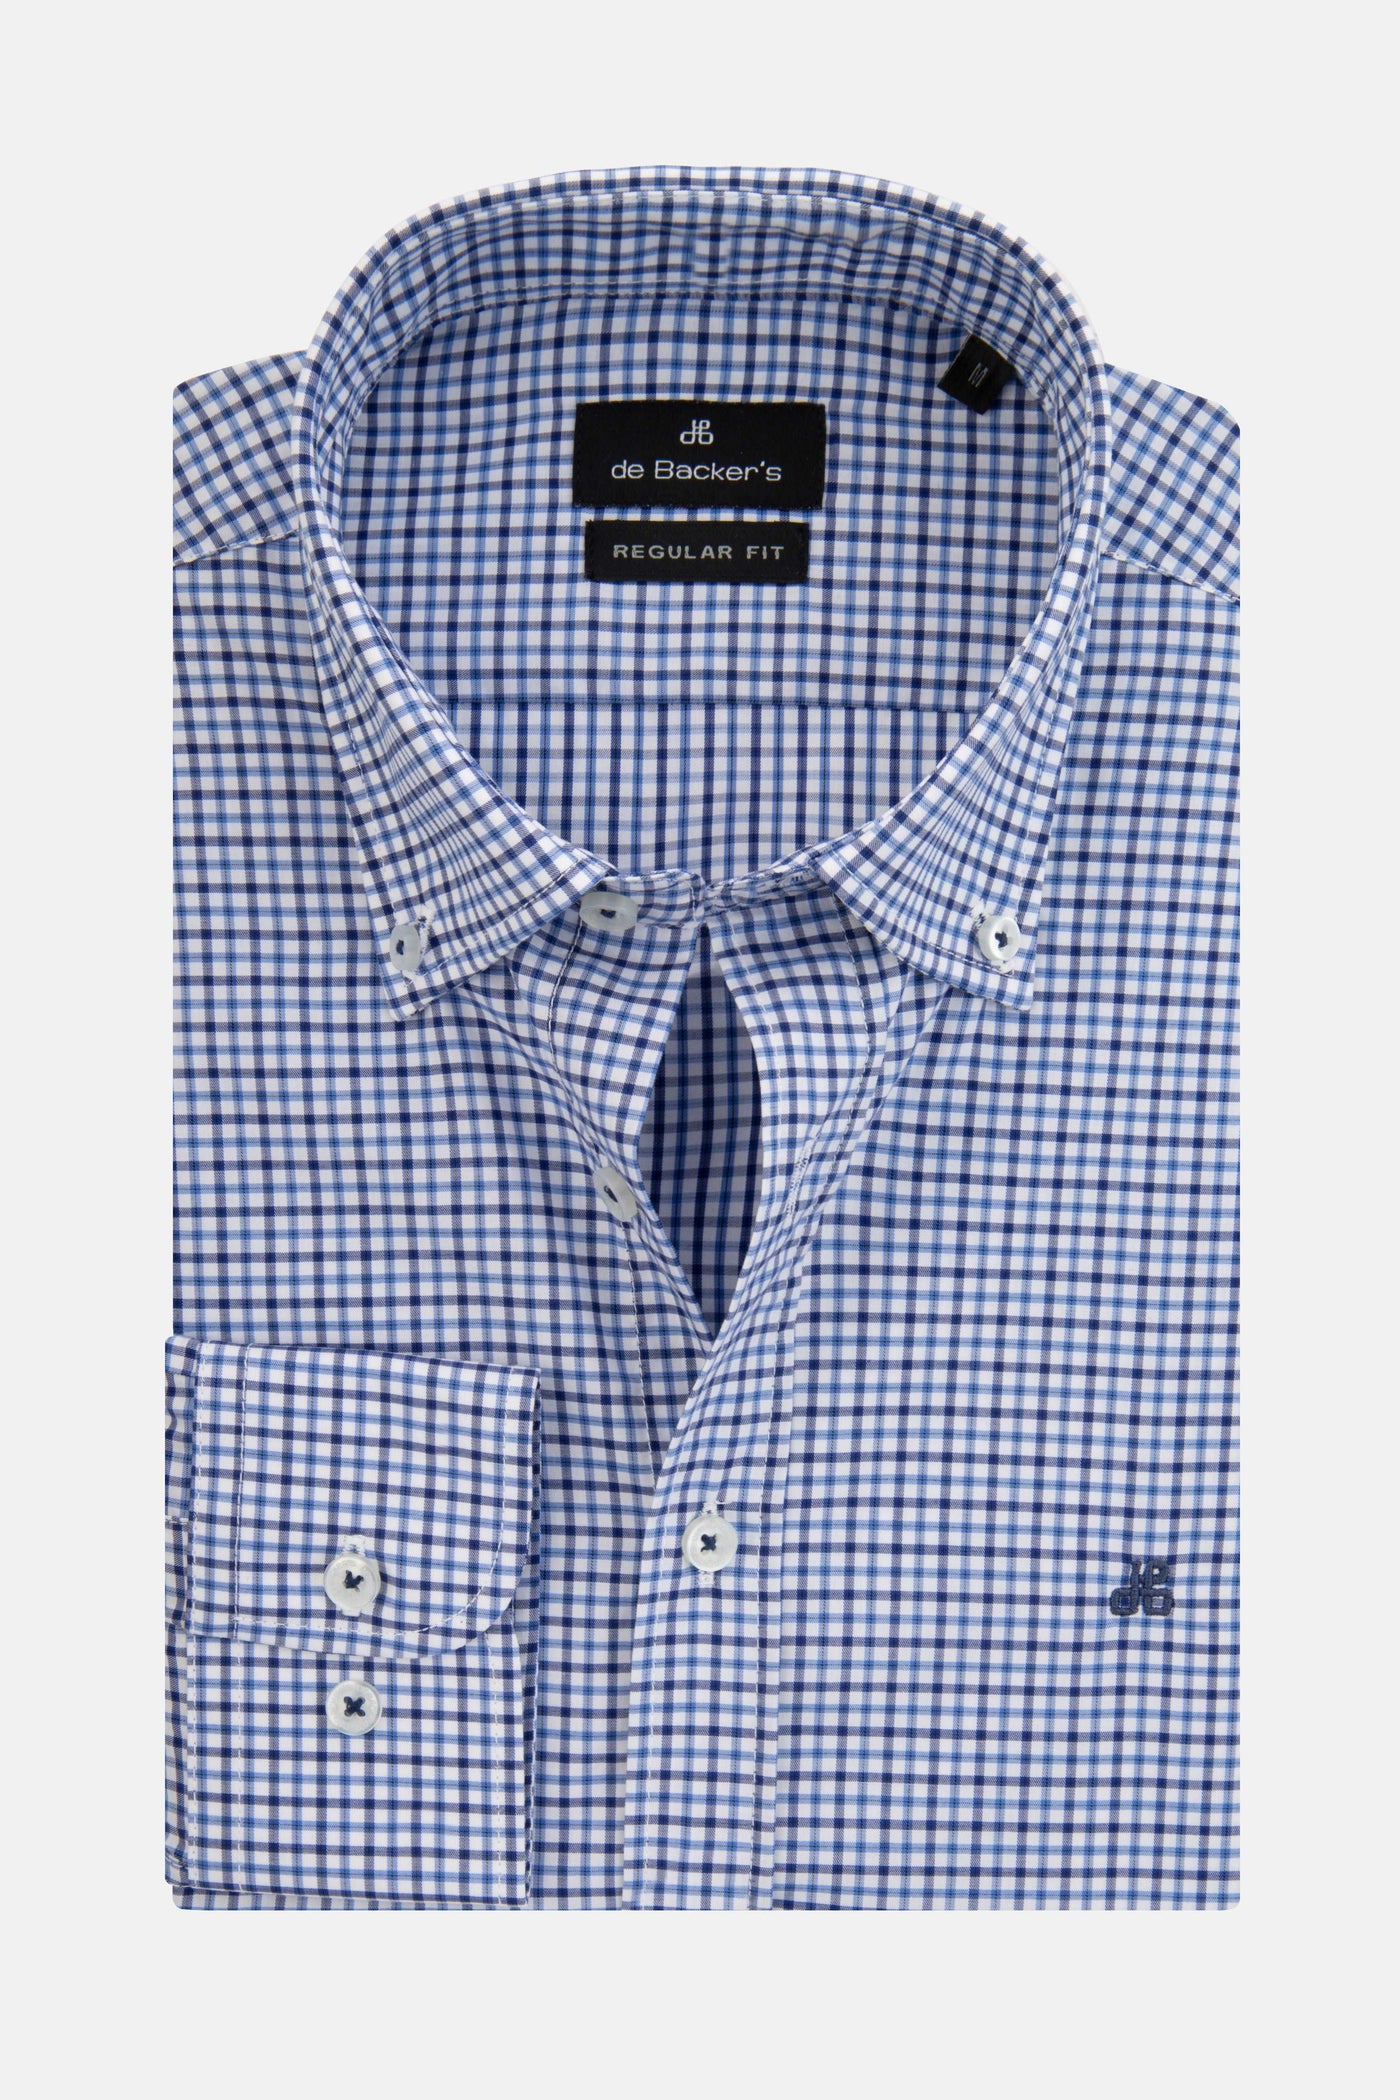 Checked Blue & Navy & White Smart Casual Shirt